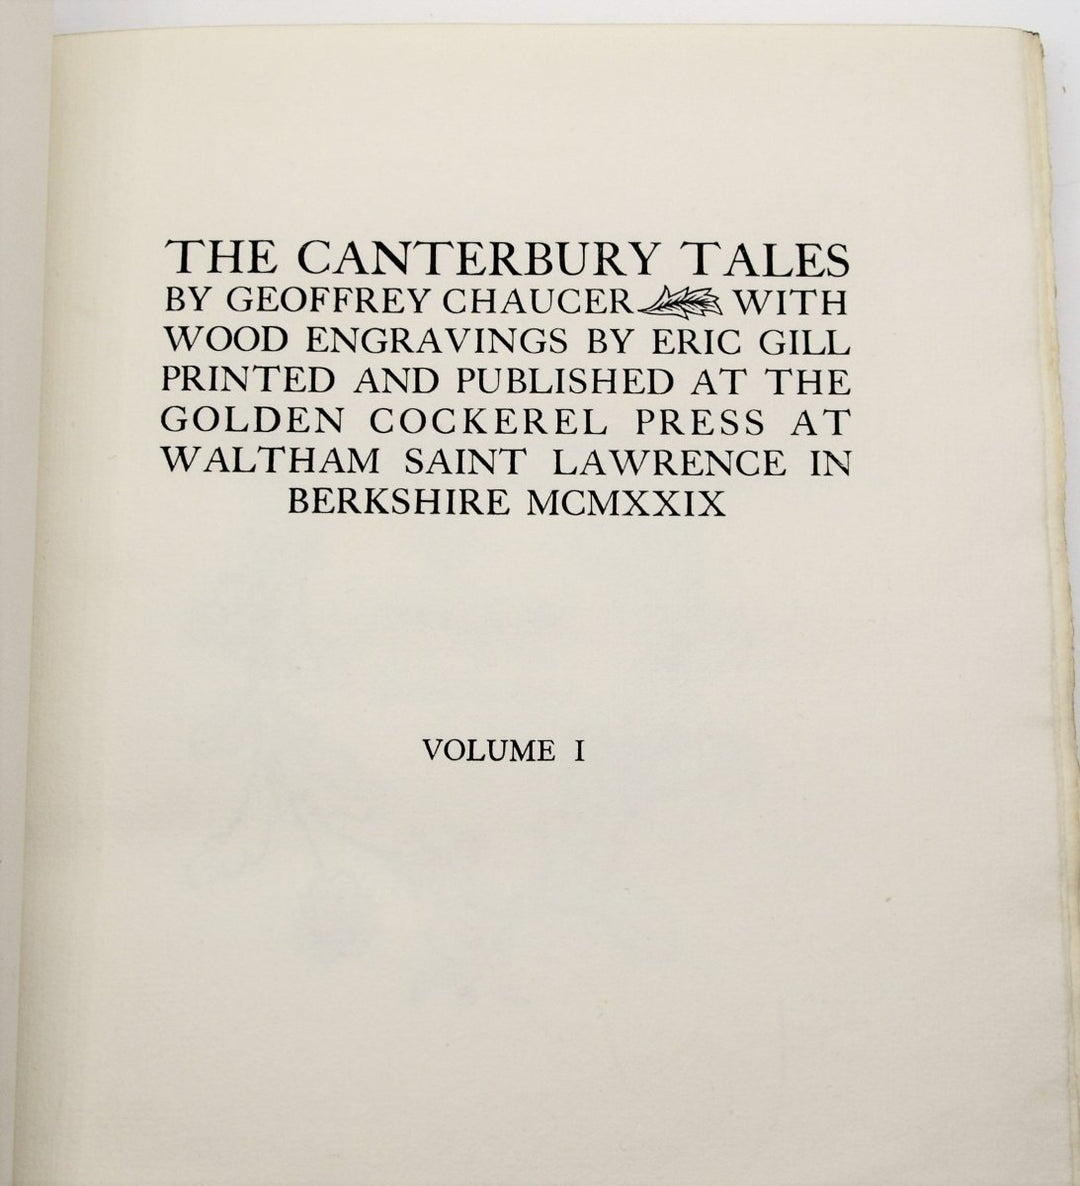 Chaucer, Geoffrey - The Canterbury Tales | image6